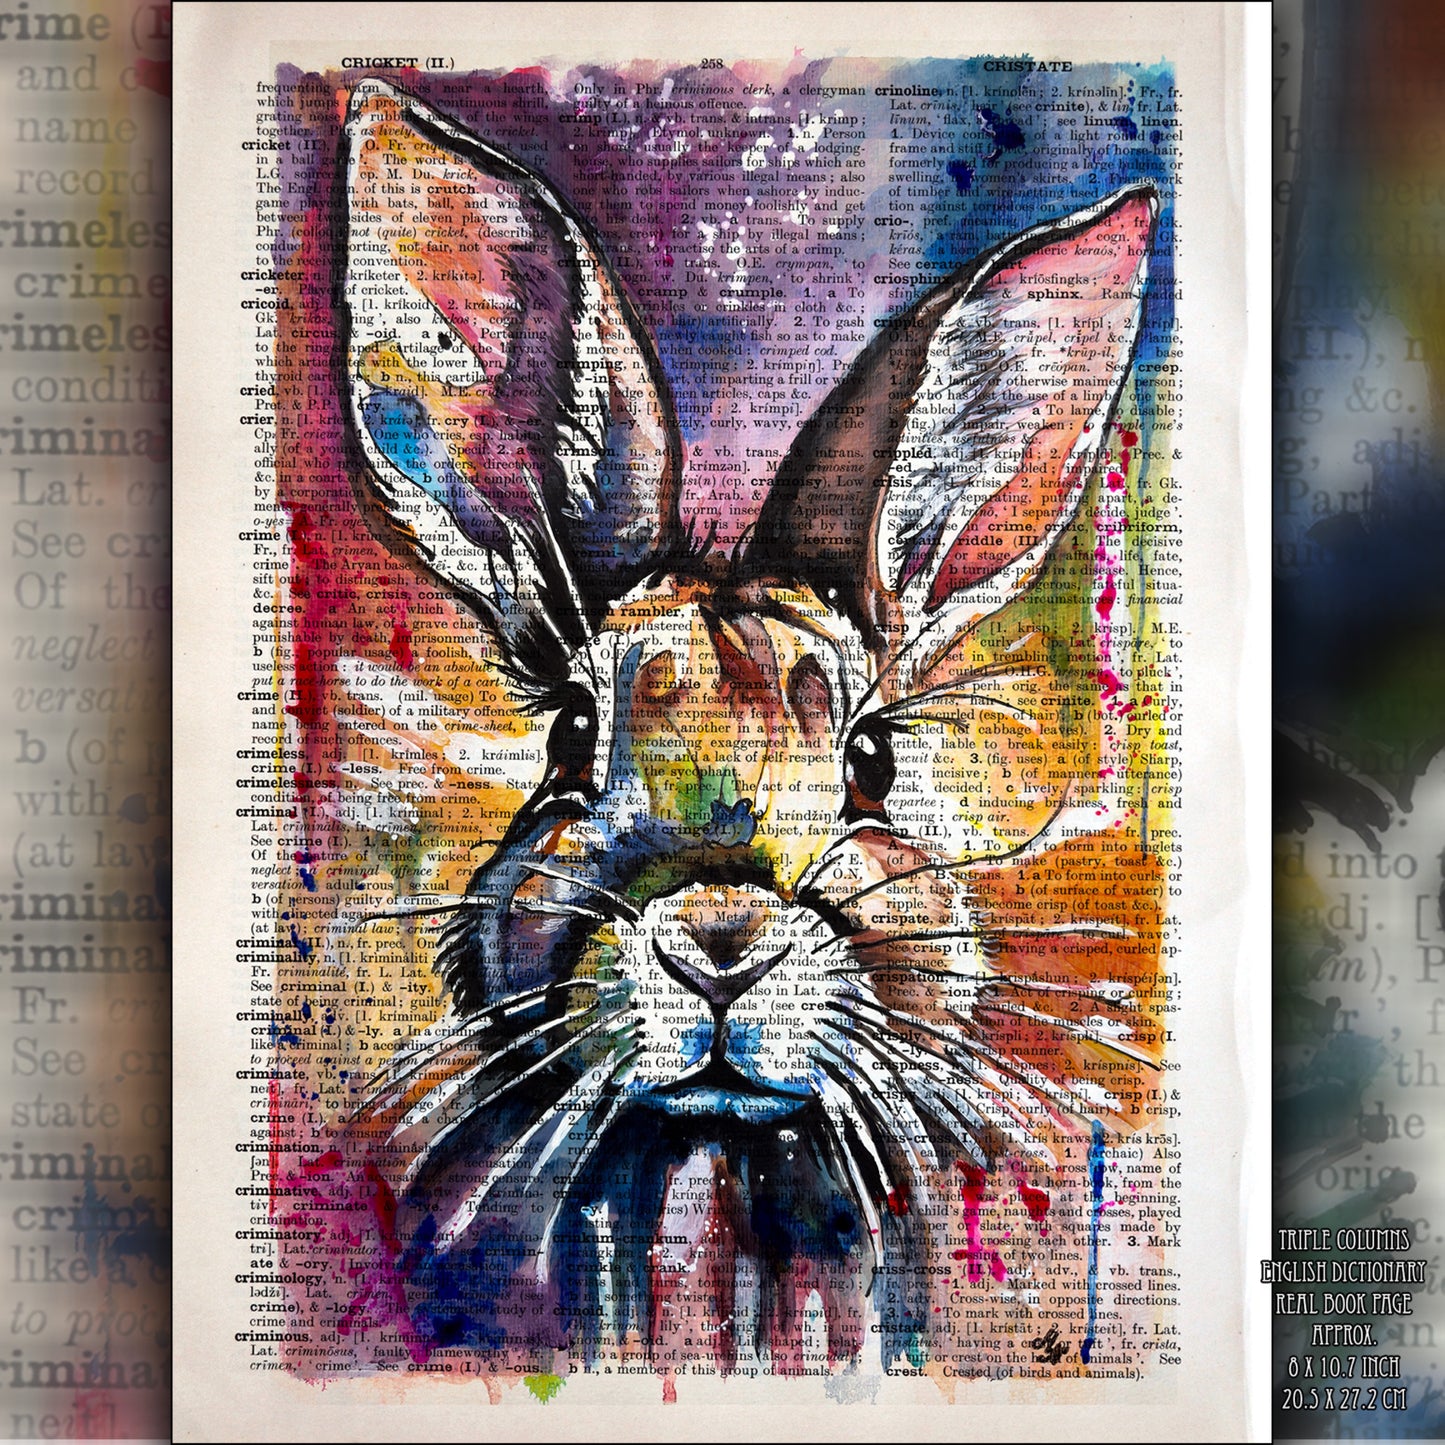 Digital art "Abstract Rabbit" by Malgorzata Nierobisz, showcasing an artistic rabbit design on an upcycled vintage dictionary page.